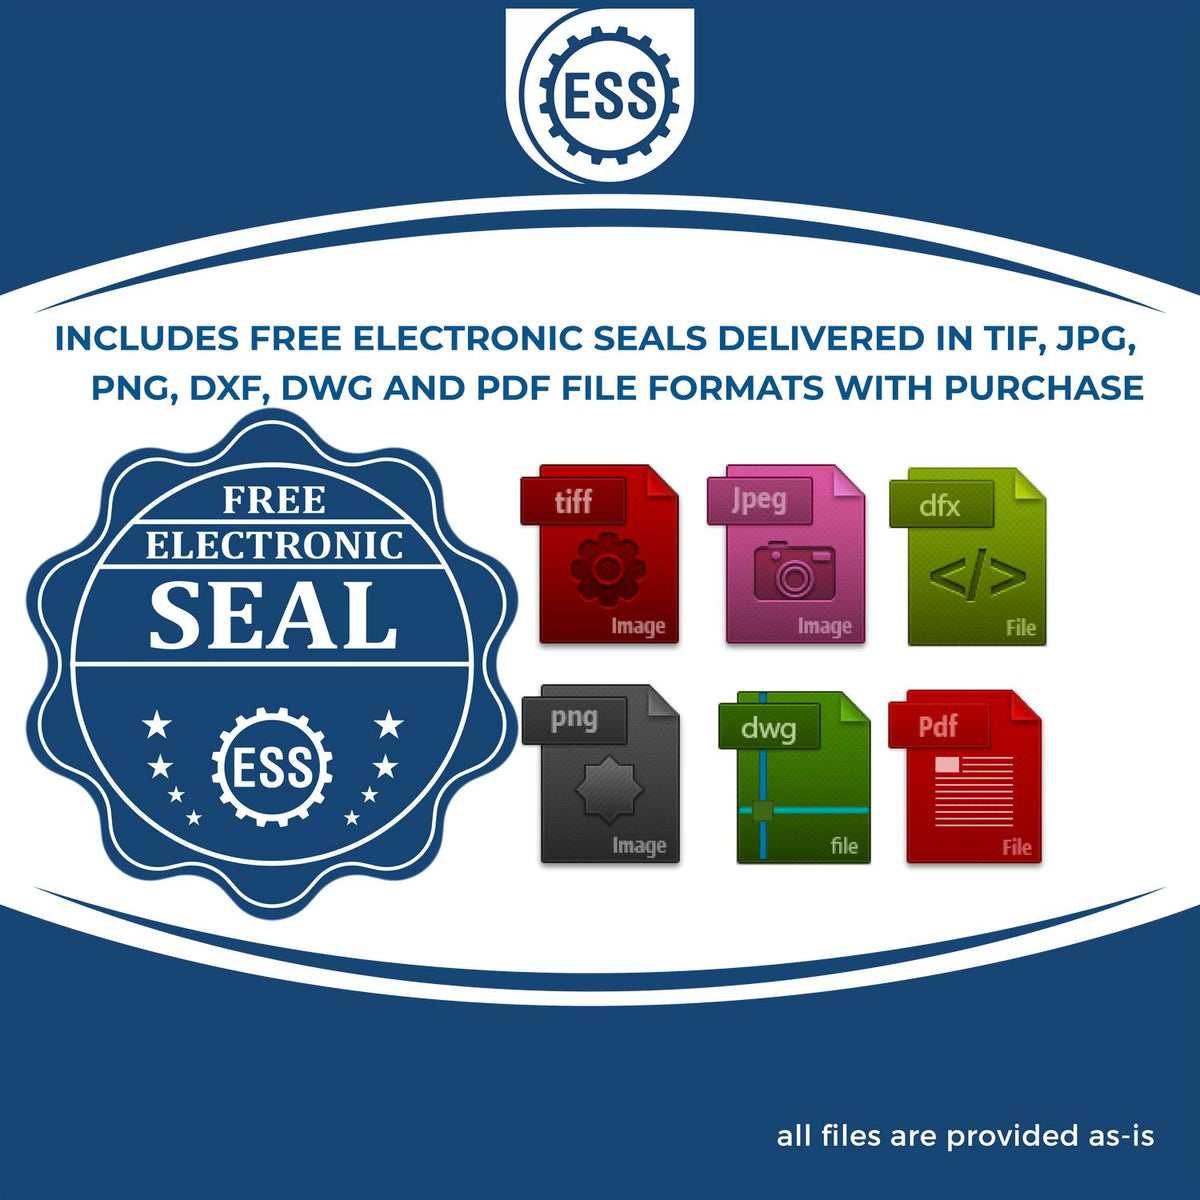 An infographic for the free electronic seal for the Premium MaxLight Pre-Inked Hawaii Geology Stamp illustrating the different file type icons such as DXF, DWG, TIF, JPG and PNG.